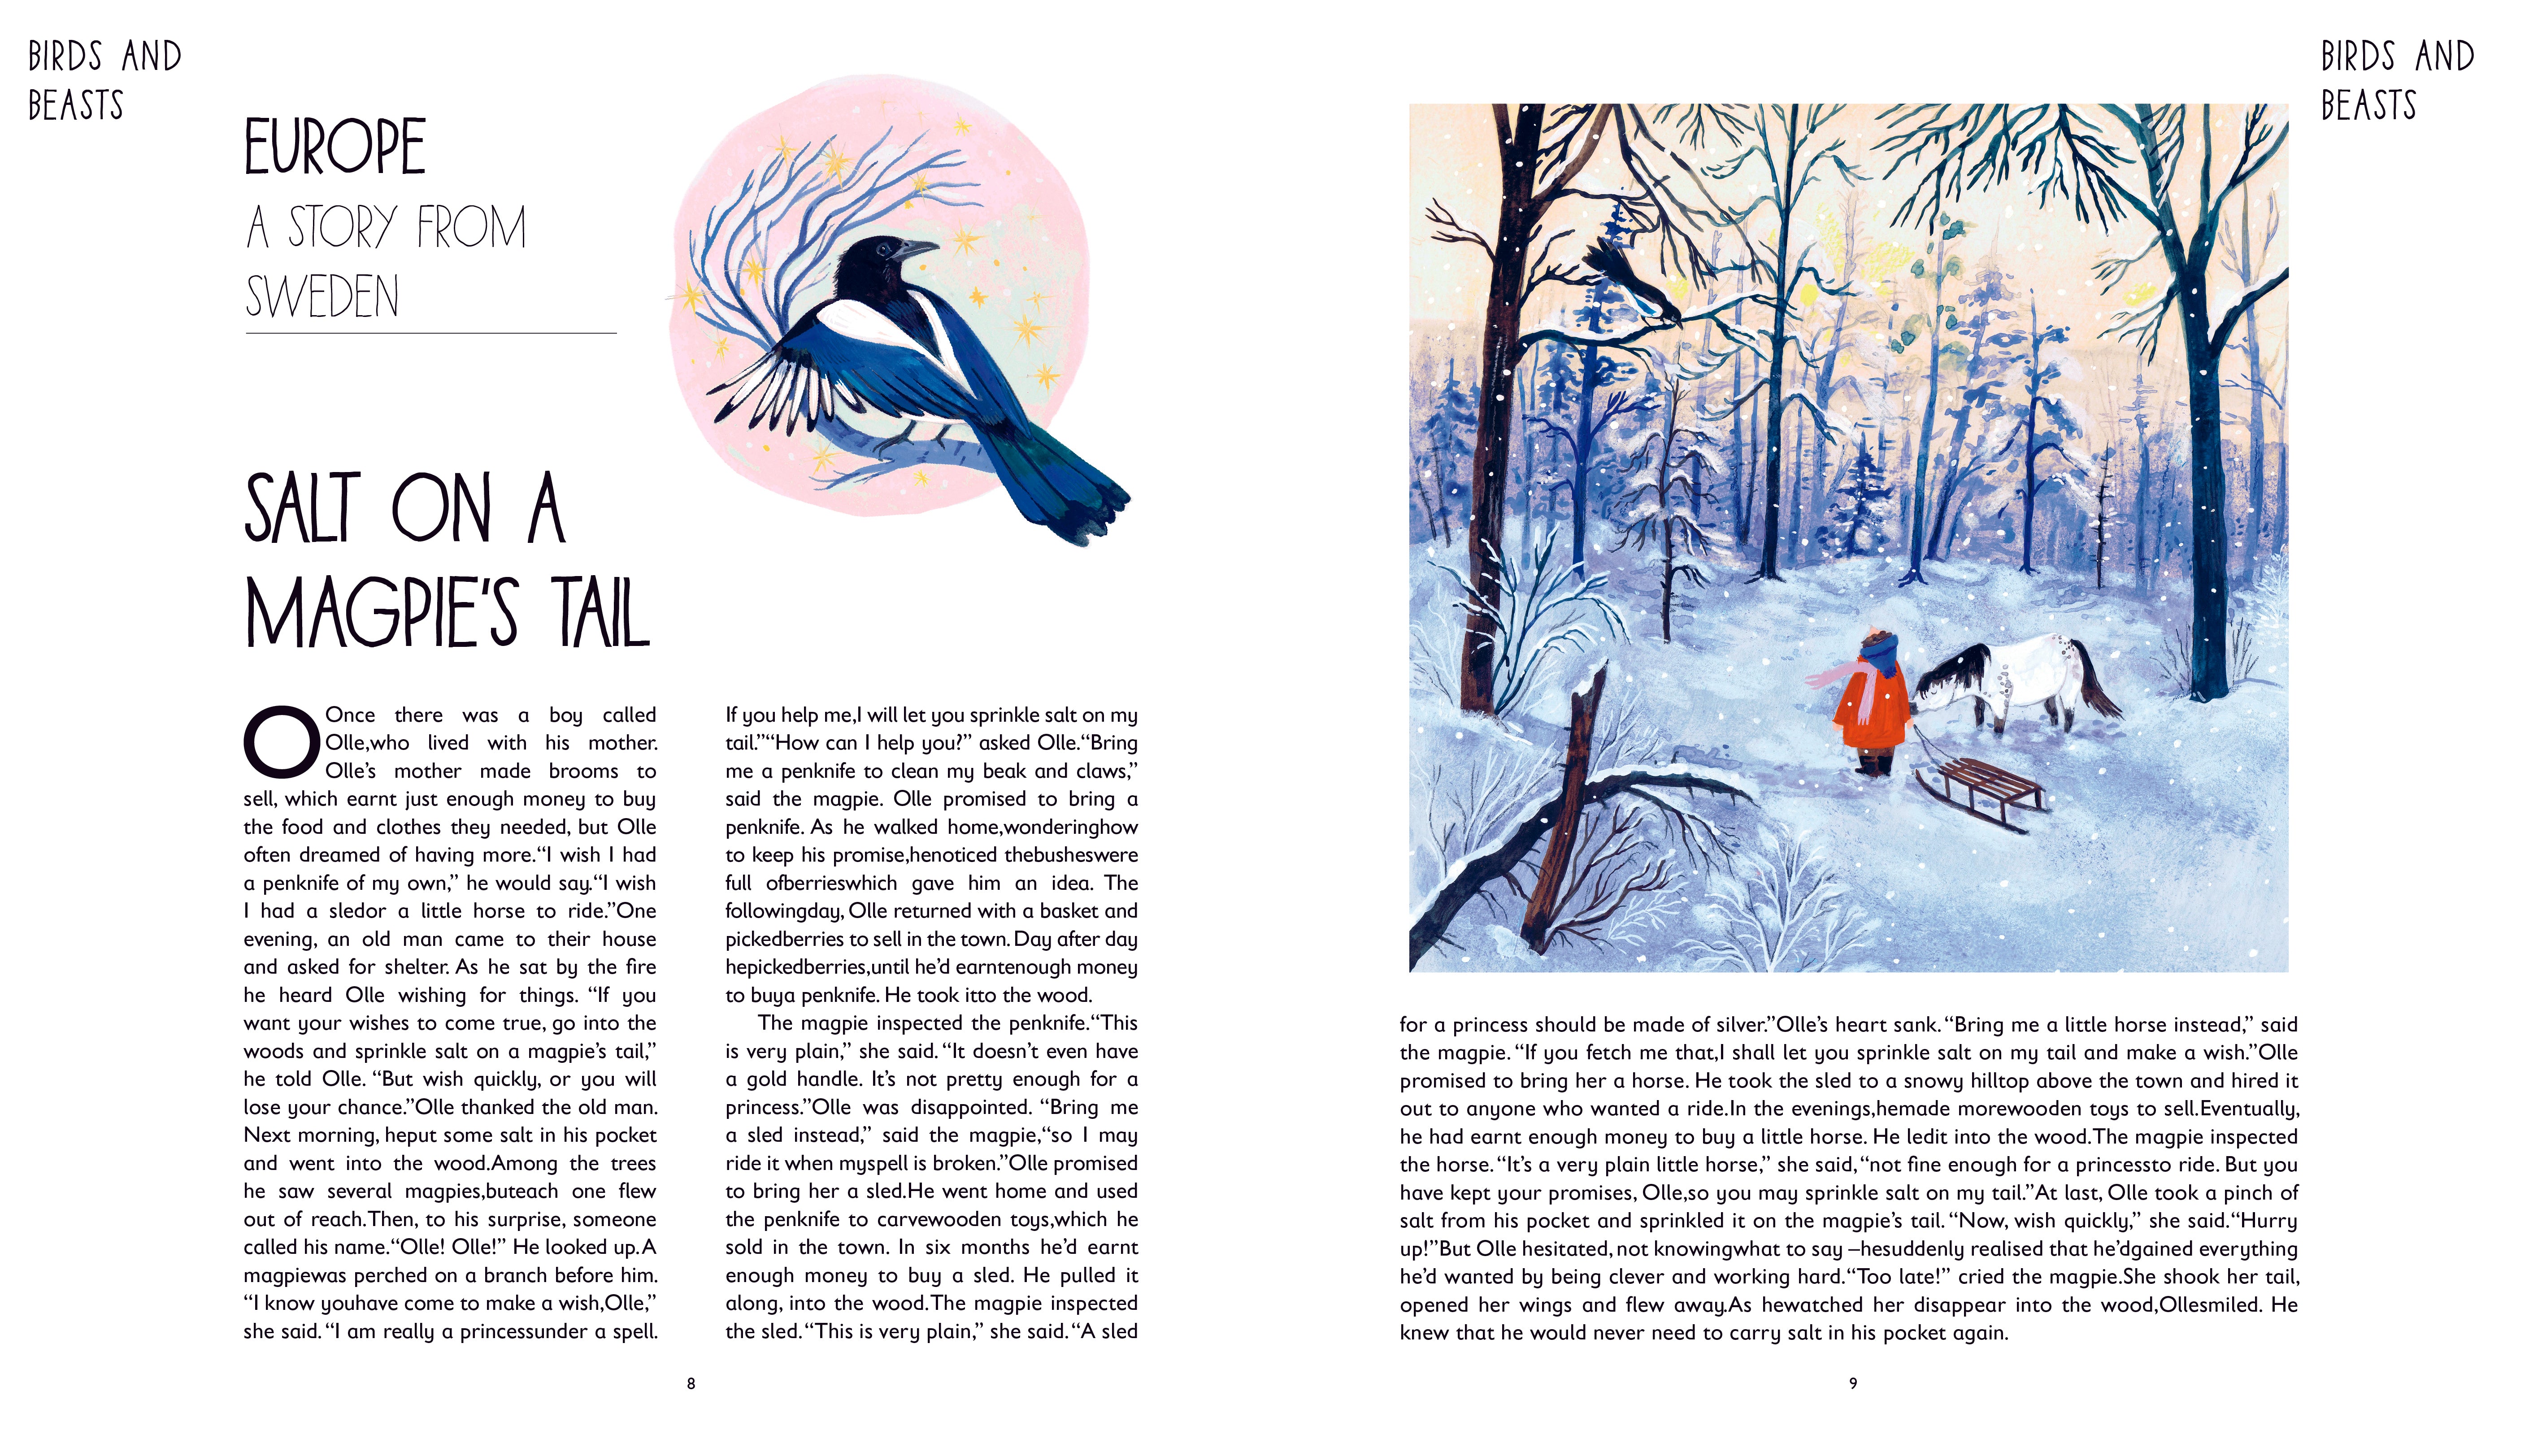 World Full of Winter Stories: 50 Folktales and Legends from Around the World